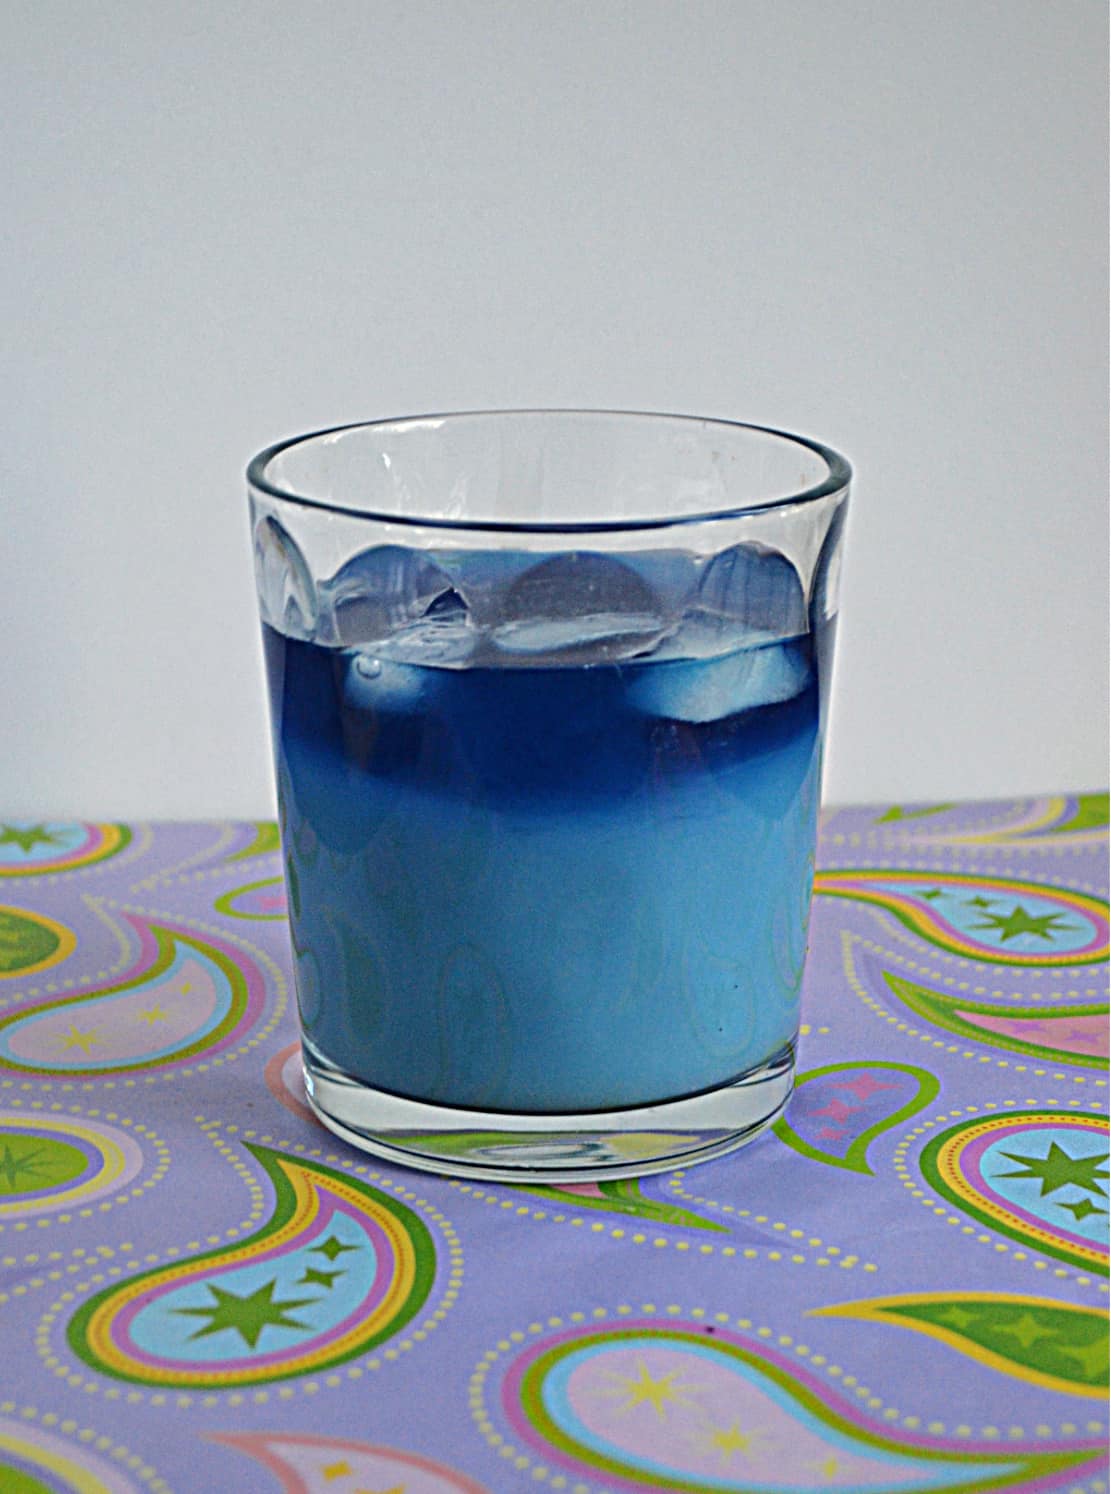 Iced Butterfly Pea Latte - Fresh Flavorful